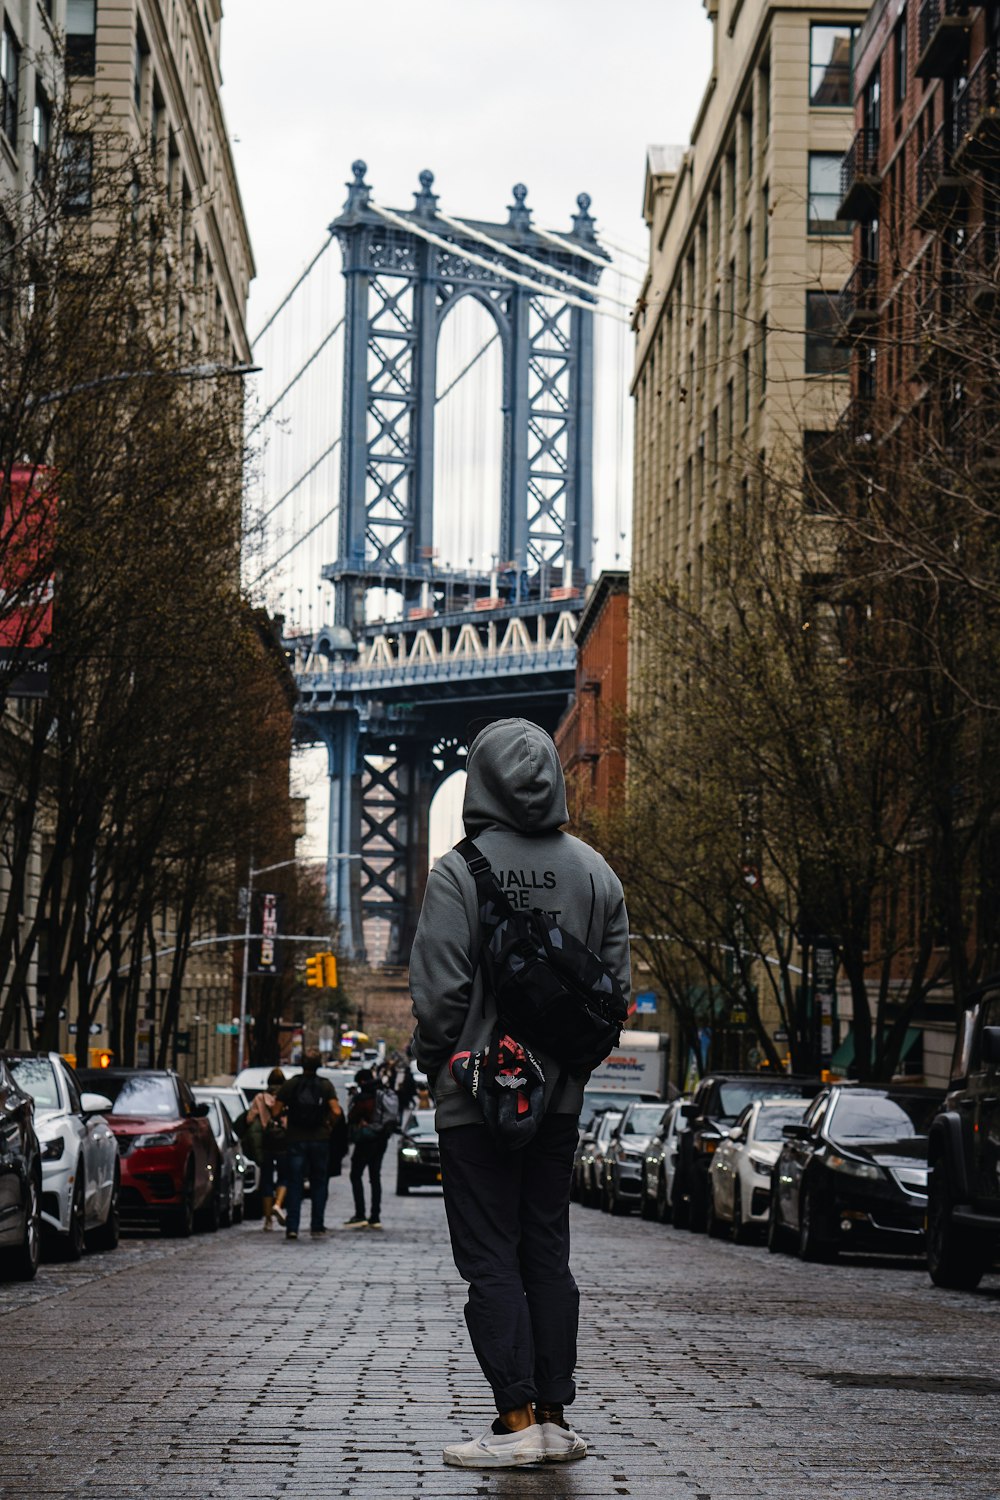 a person walking down a street with a bridge in the background